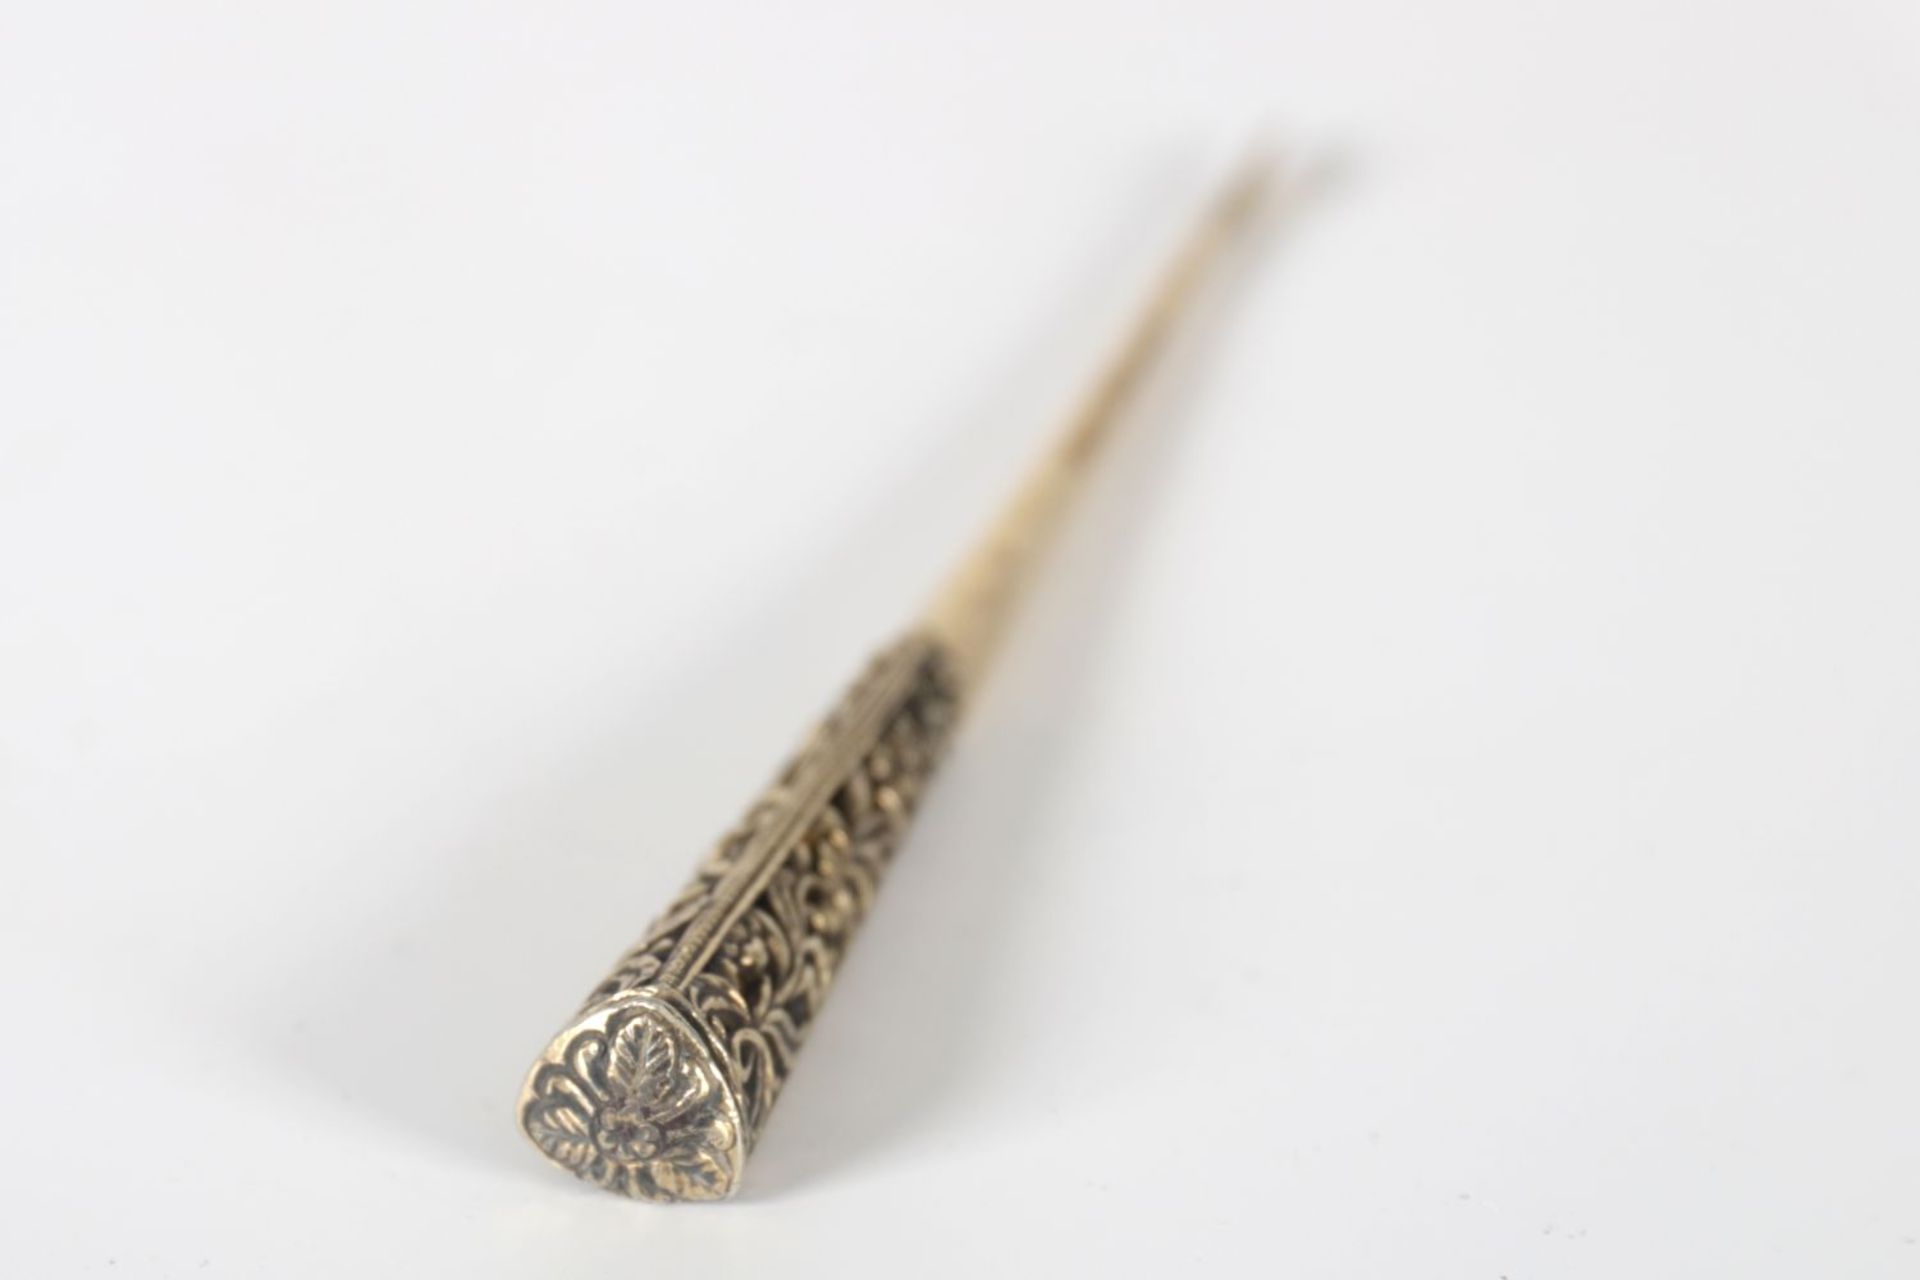 19TH-CENTURY JAPANESE SILVER HAIR PIN - Image 3 of 3